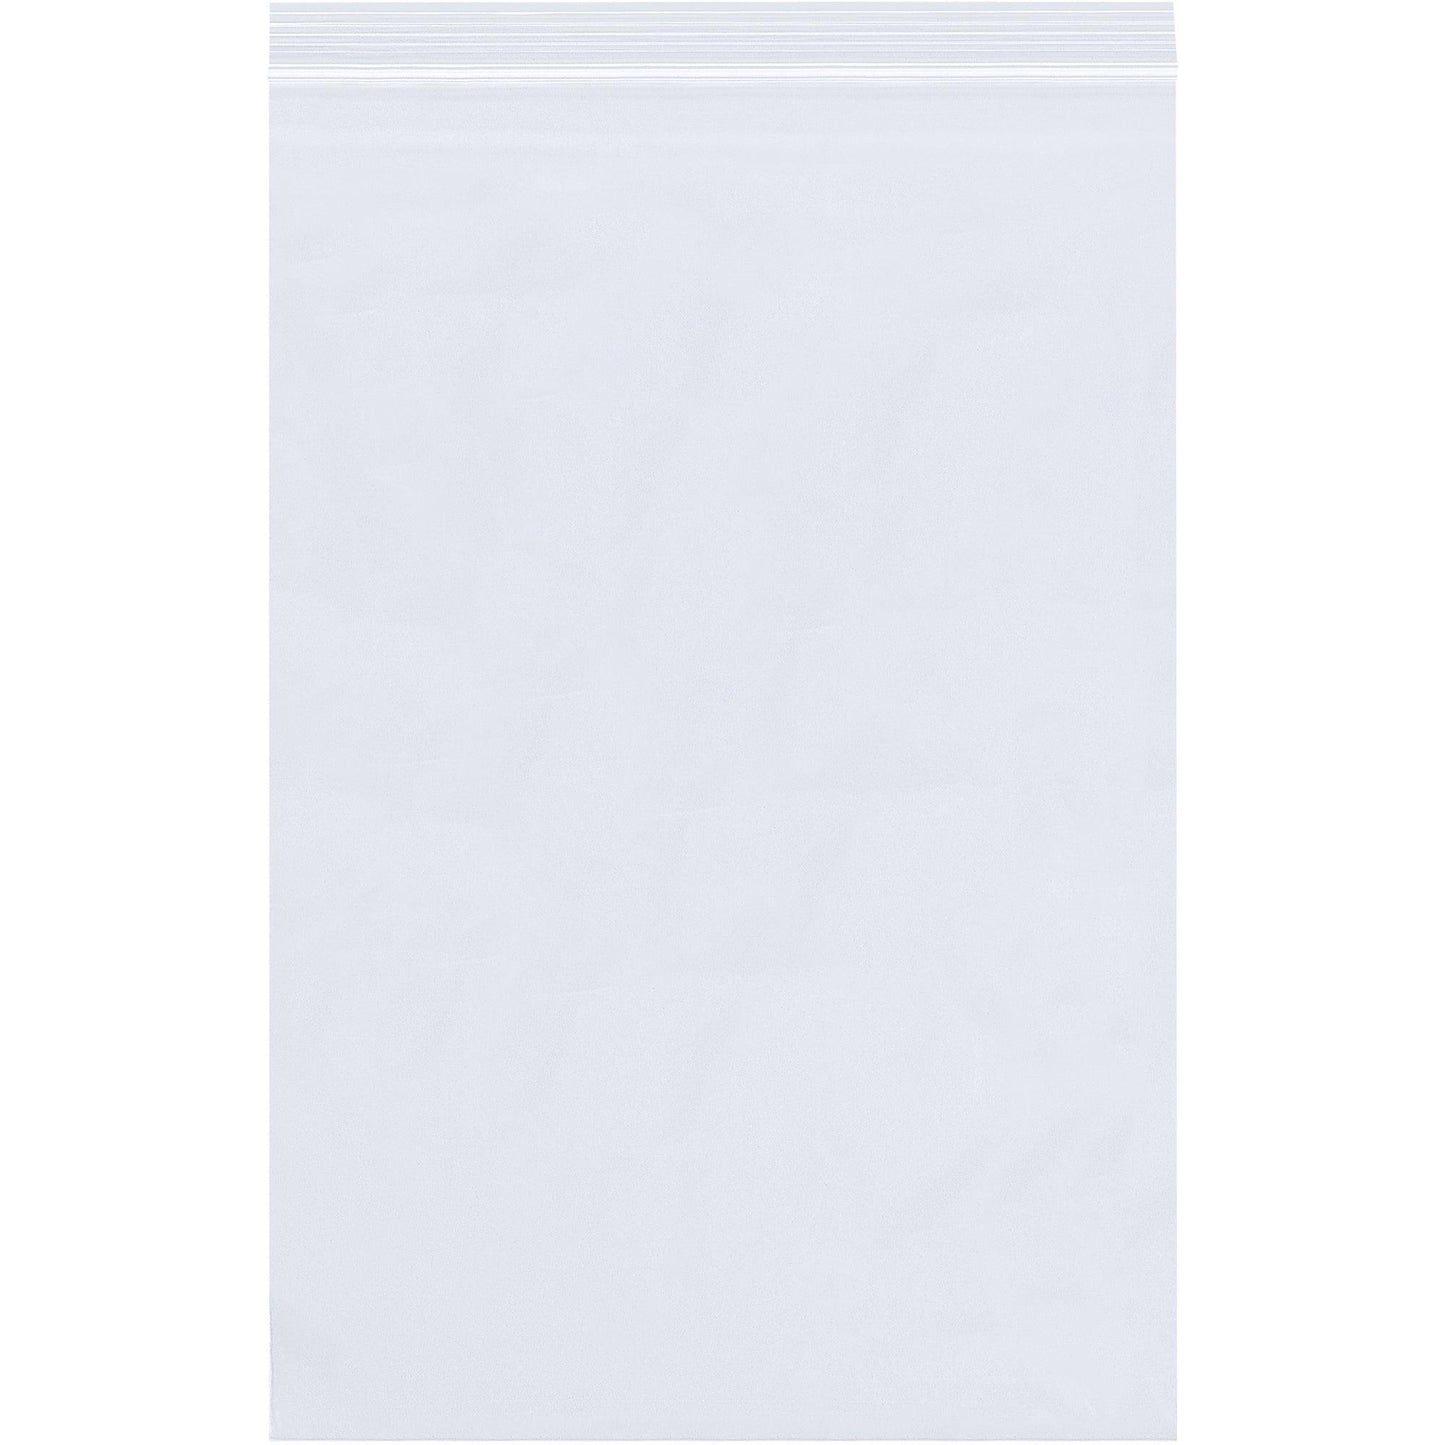 10 x 13" - 2 Mil Reclosable Poly Bags - PB3660